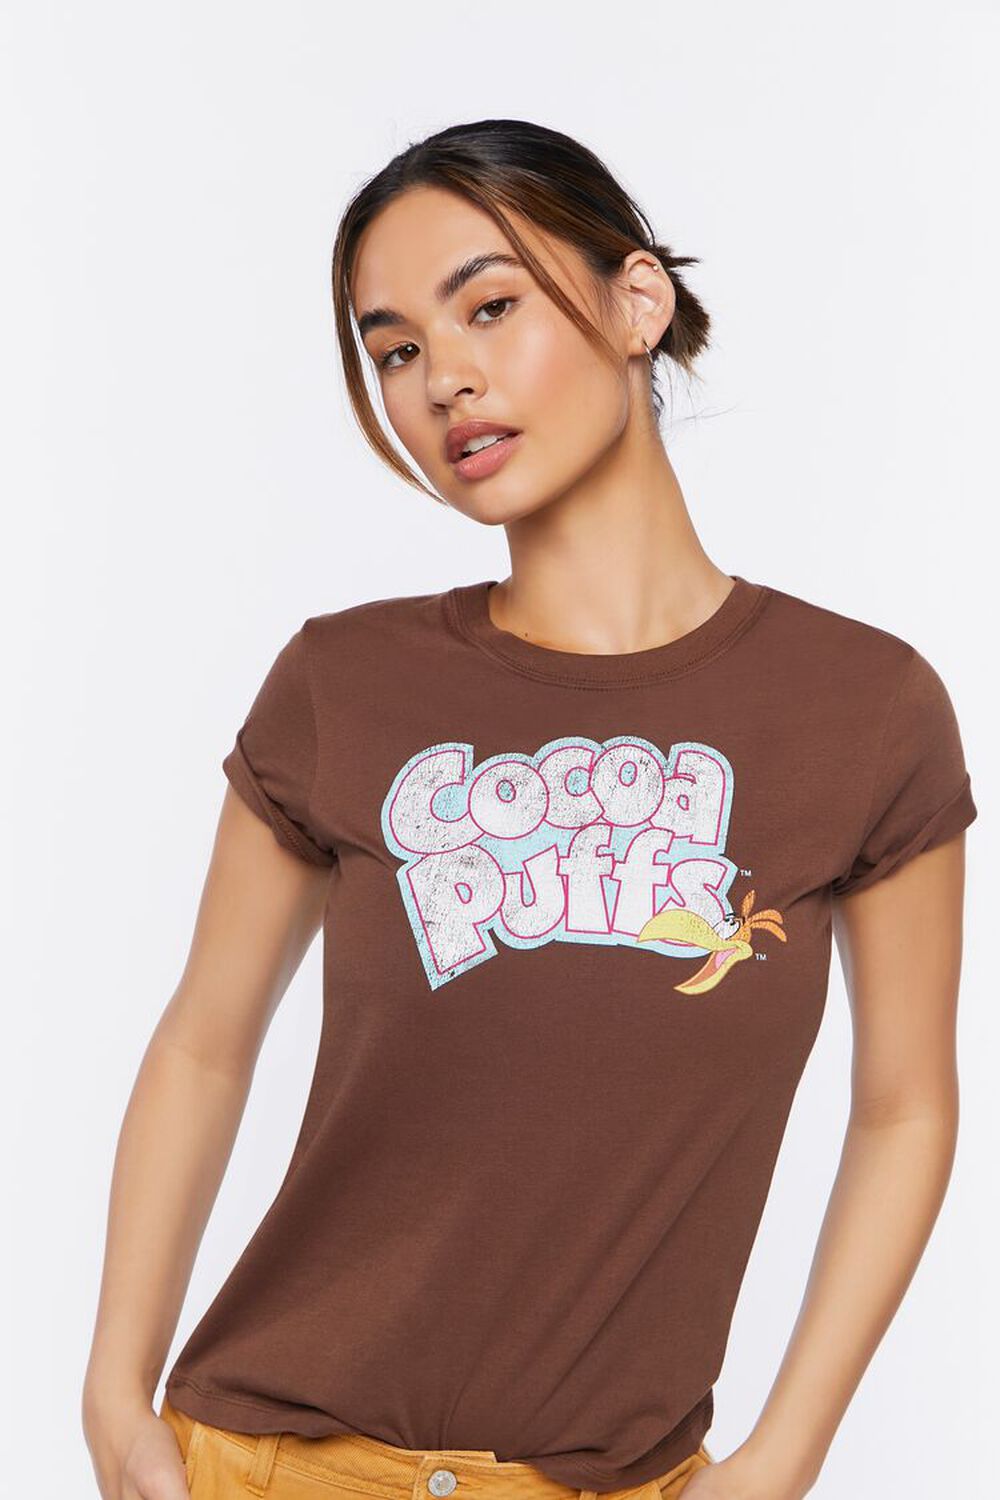 BROWN/MULTI Cocoa Puffs Graphic Tee, image 1